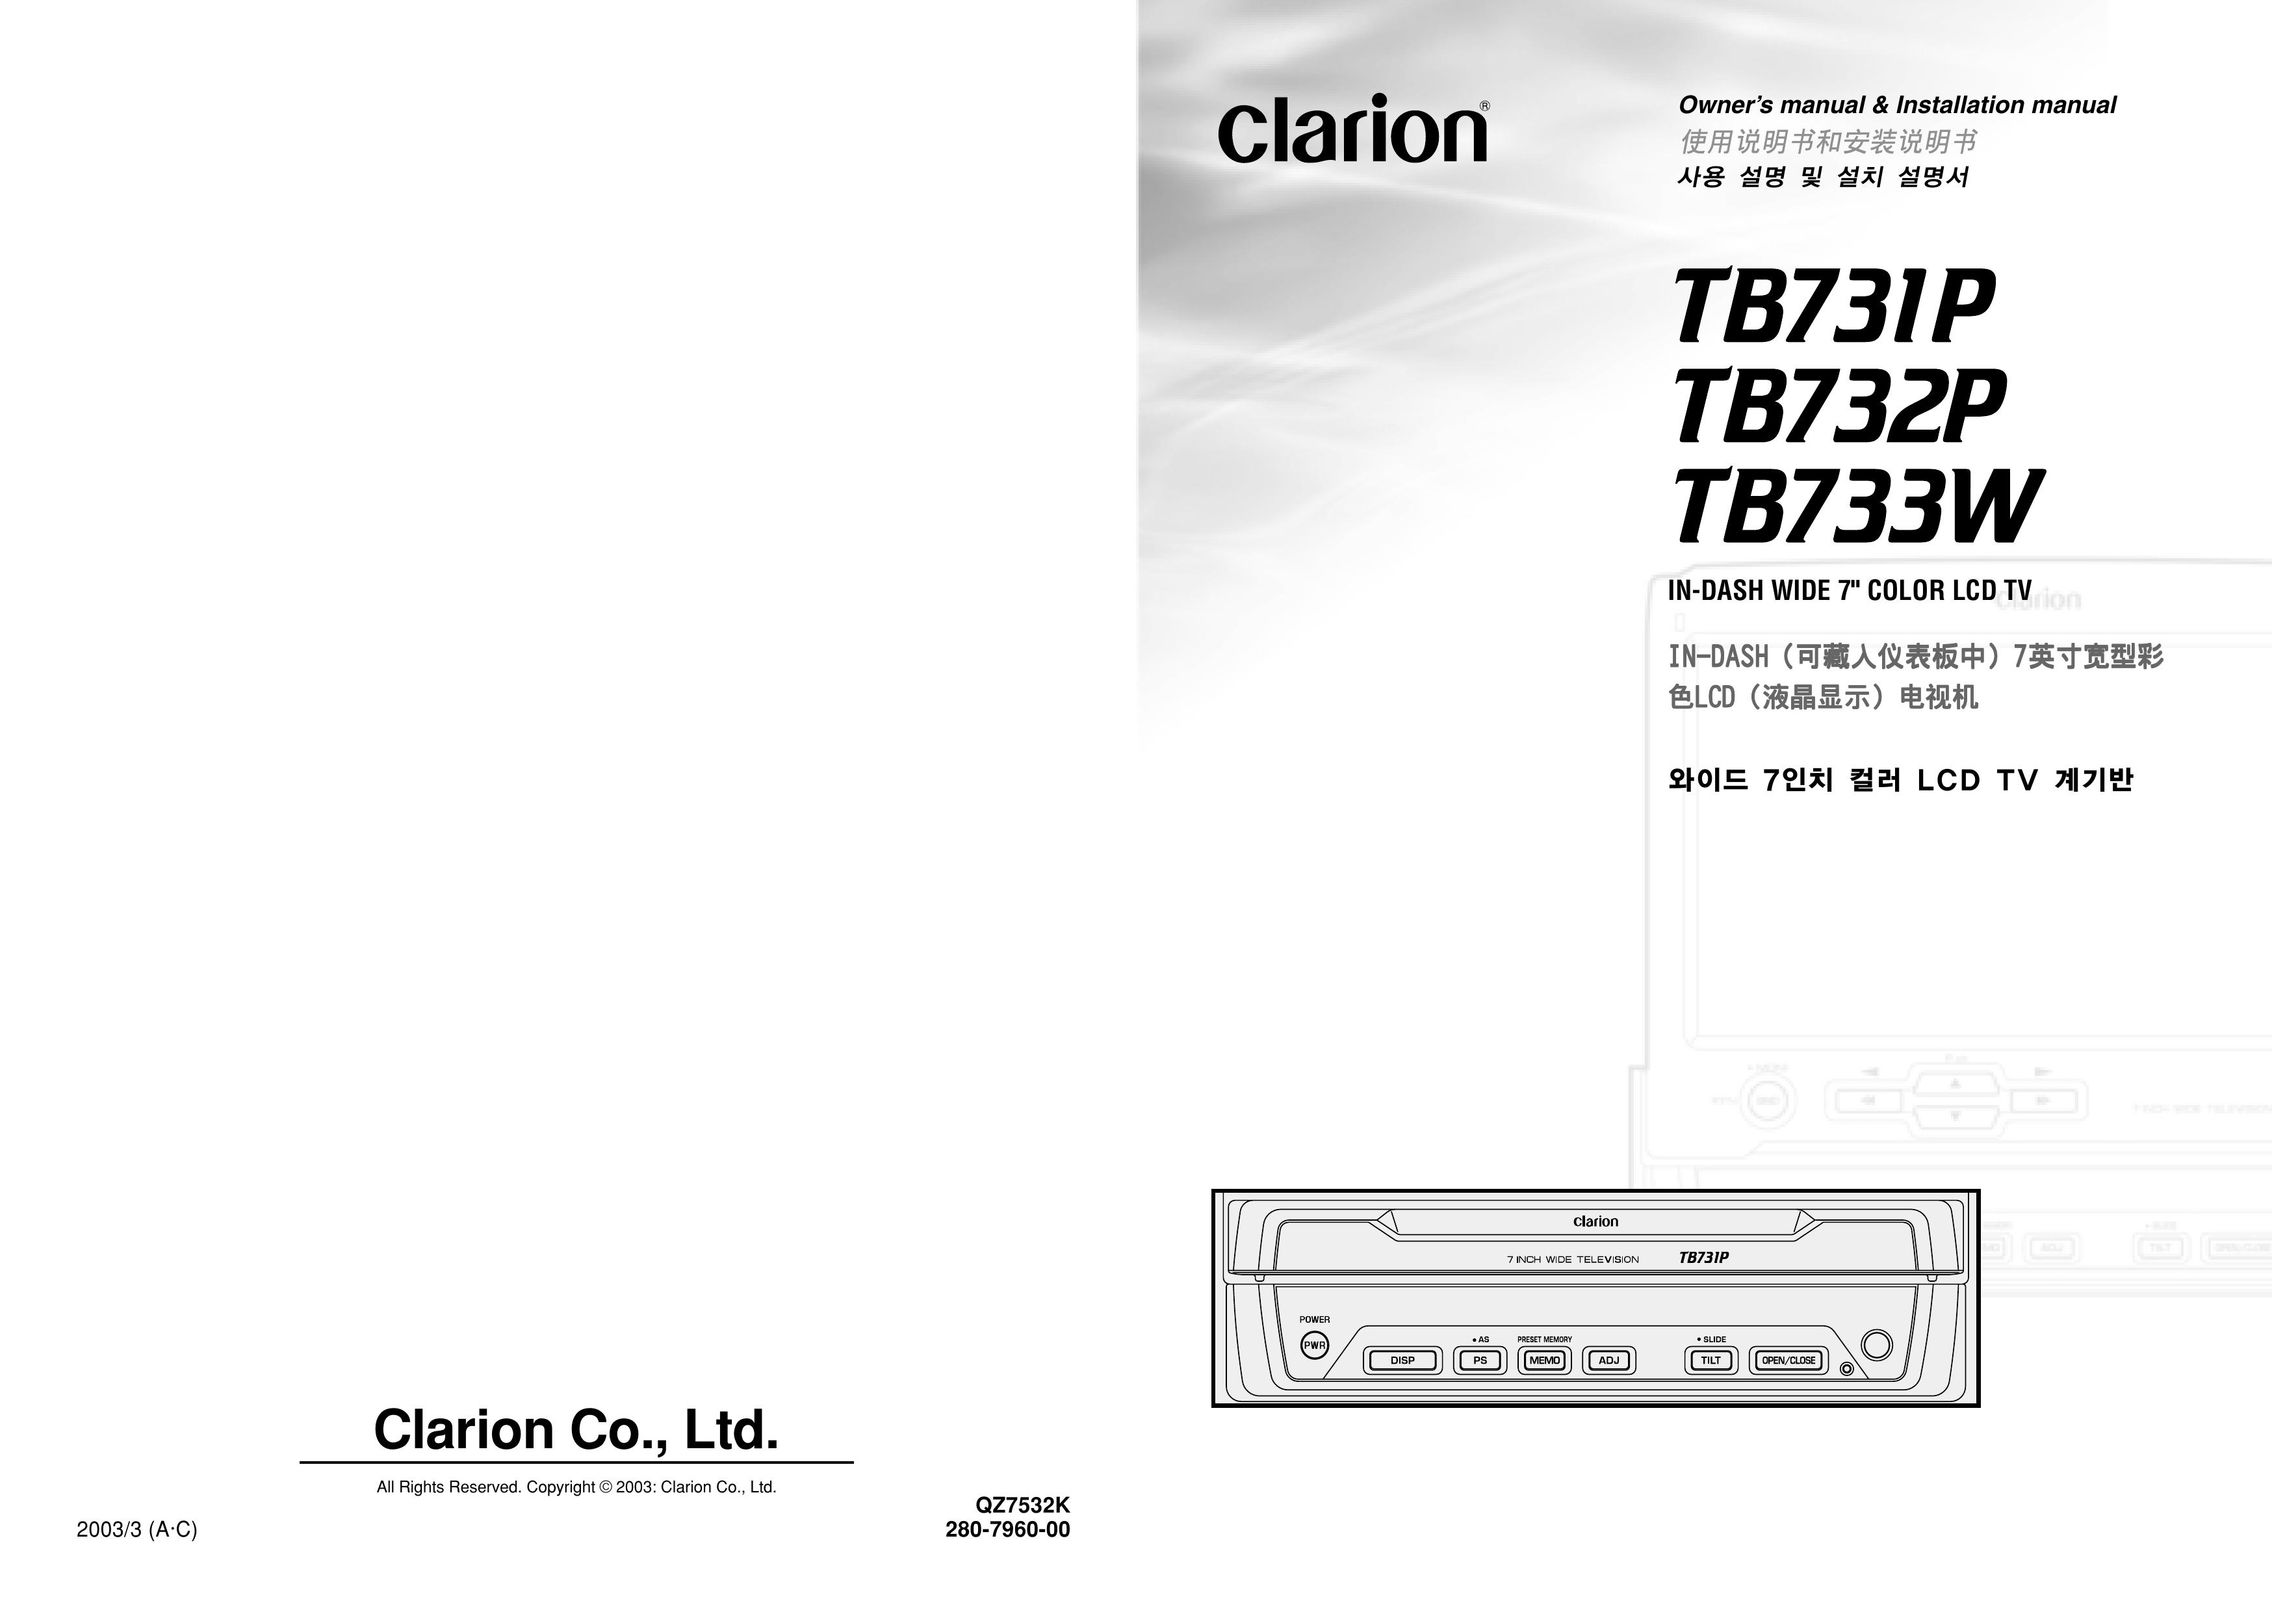 Clarion TB732P Flat Panel Television User Manual